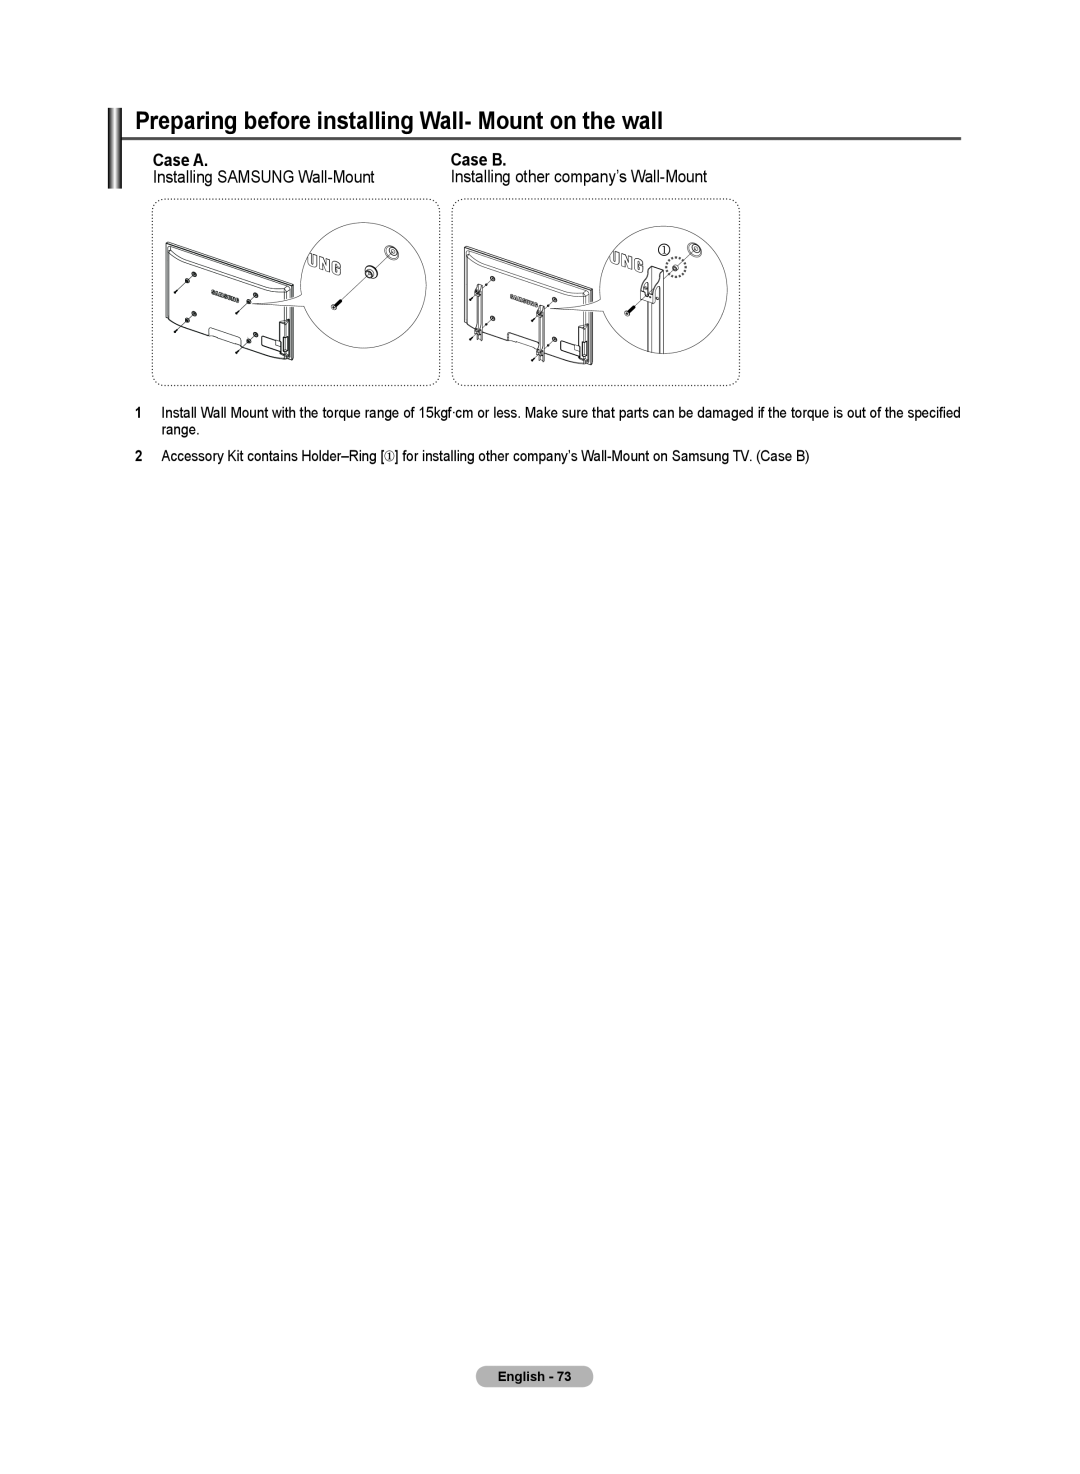 Samsung 510 user manual Preparing before installing Wall- Mount on the wall, Case A, Case B 